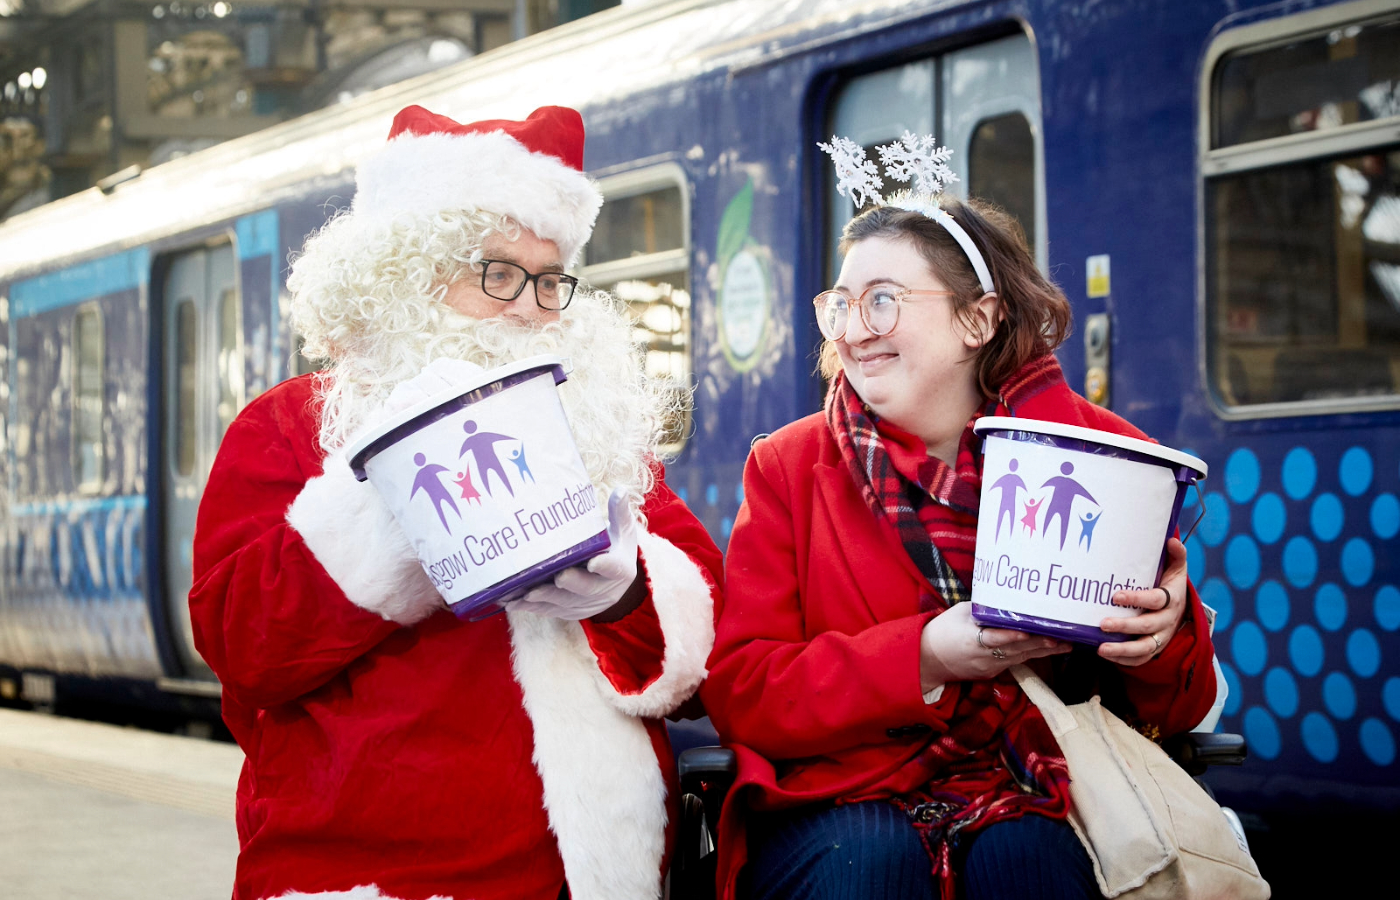 Glasgow Care Foundation fundraisers at Glasgow Central Station. 